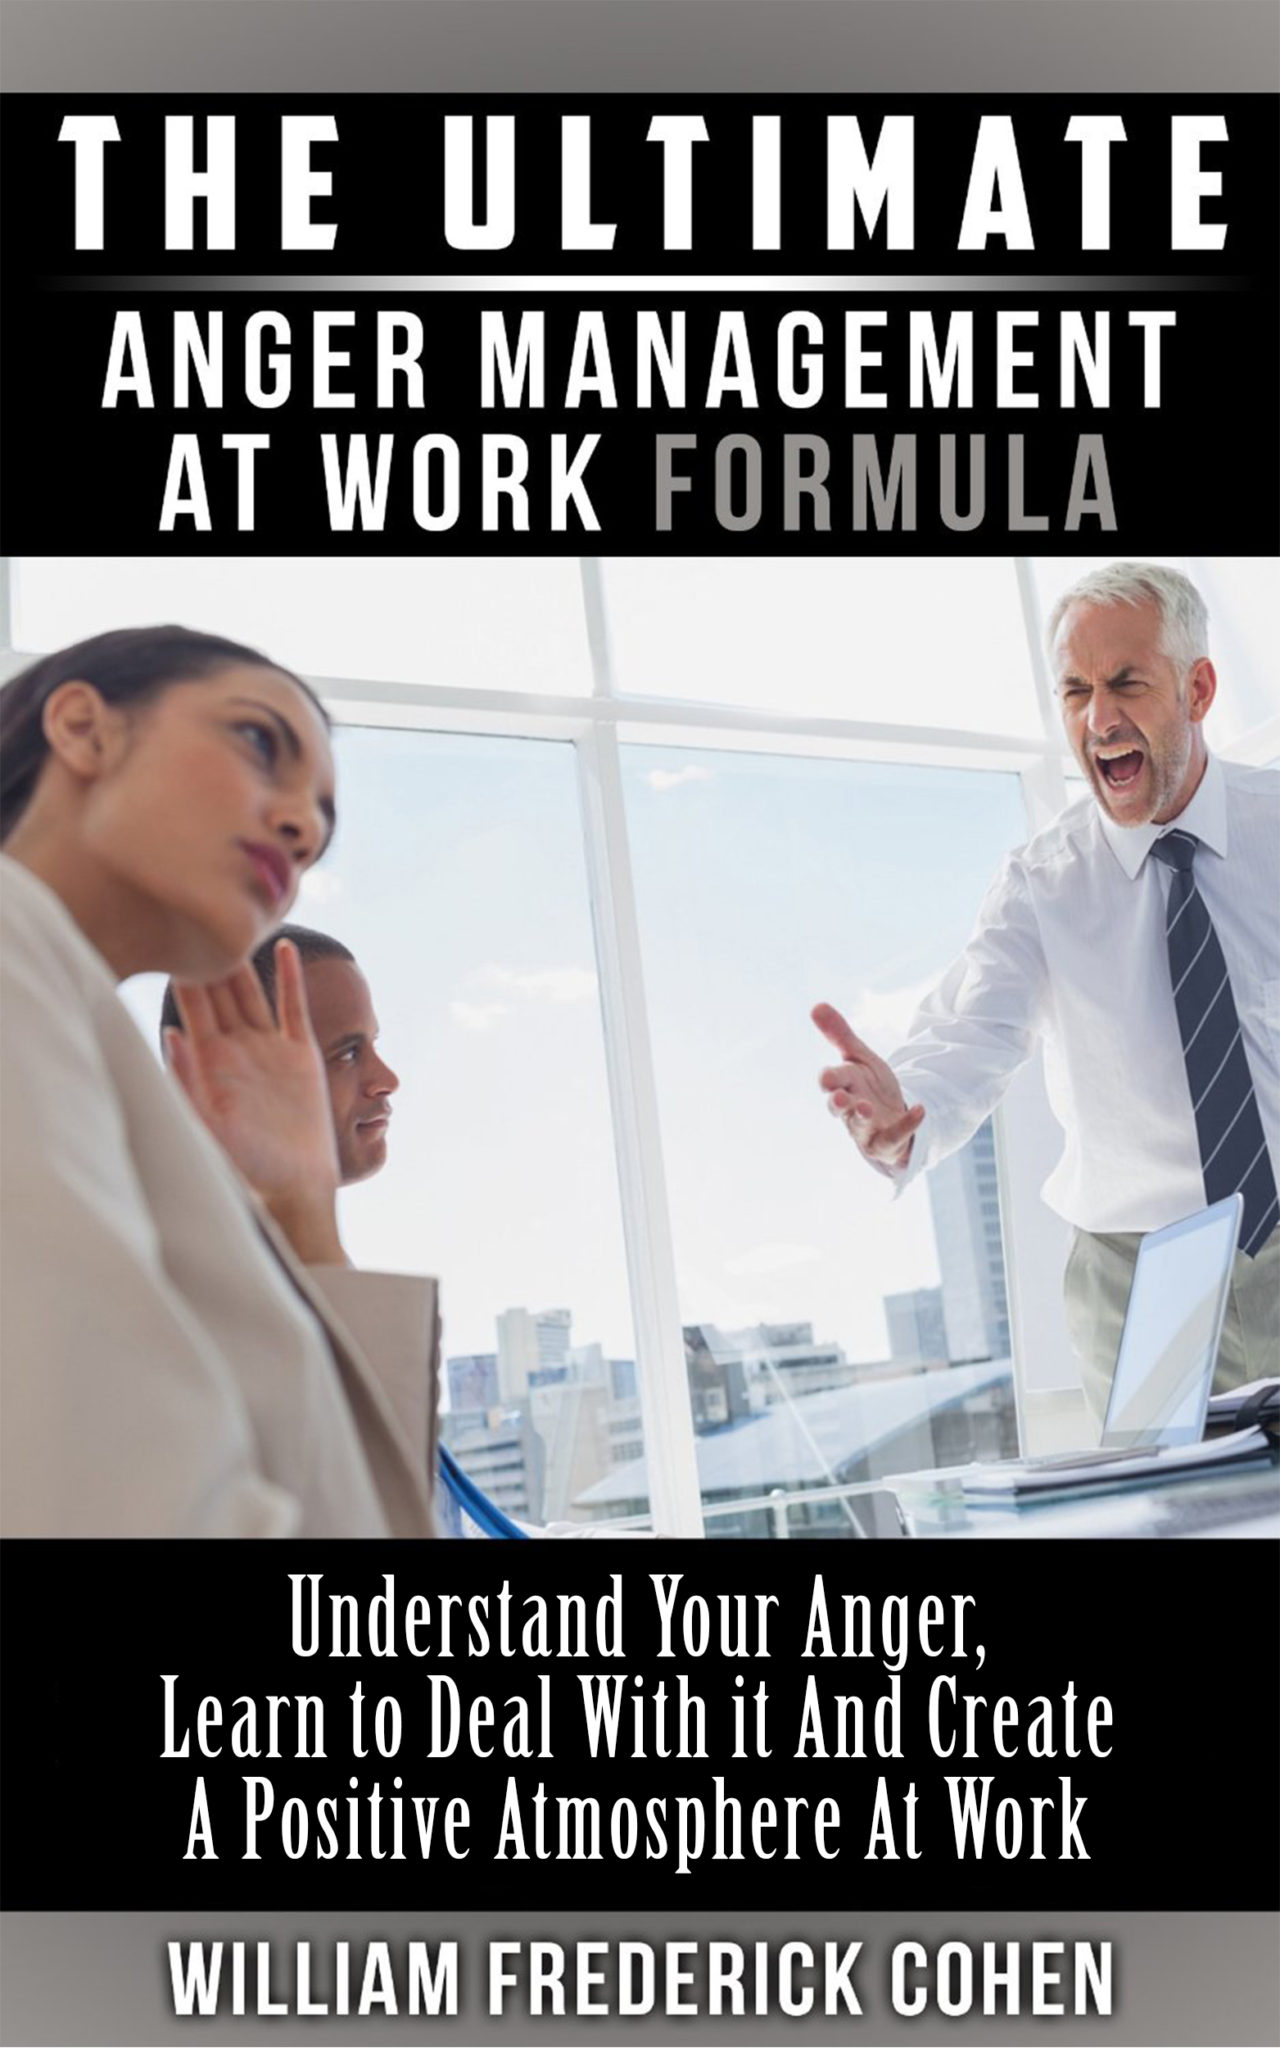 The Ultimate Anger Management at Work Formula: Understand Your Anger, Learn to Deal with it and Create a Positive Atmosphere at Work by William Frederick Cohen